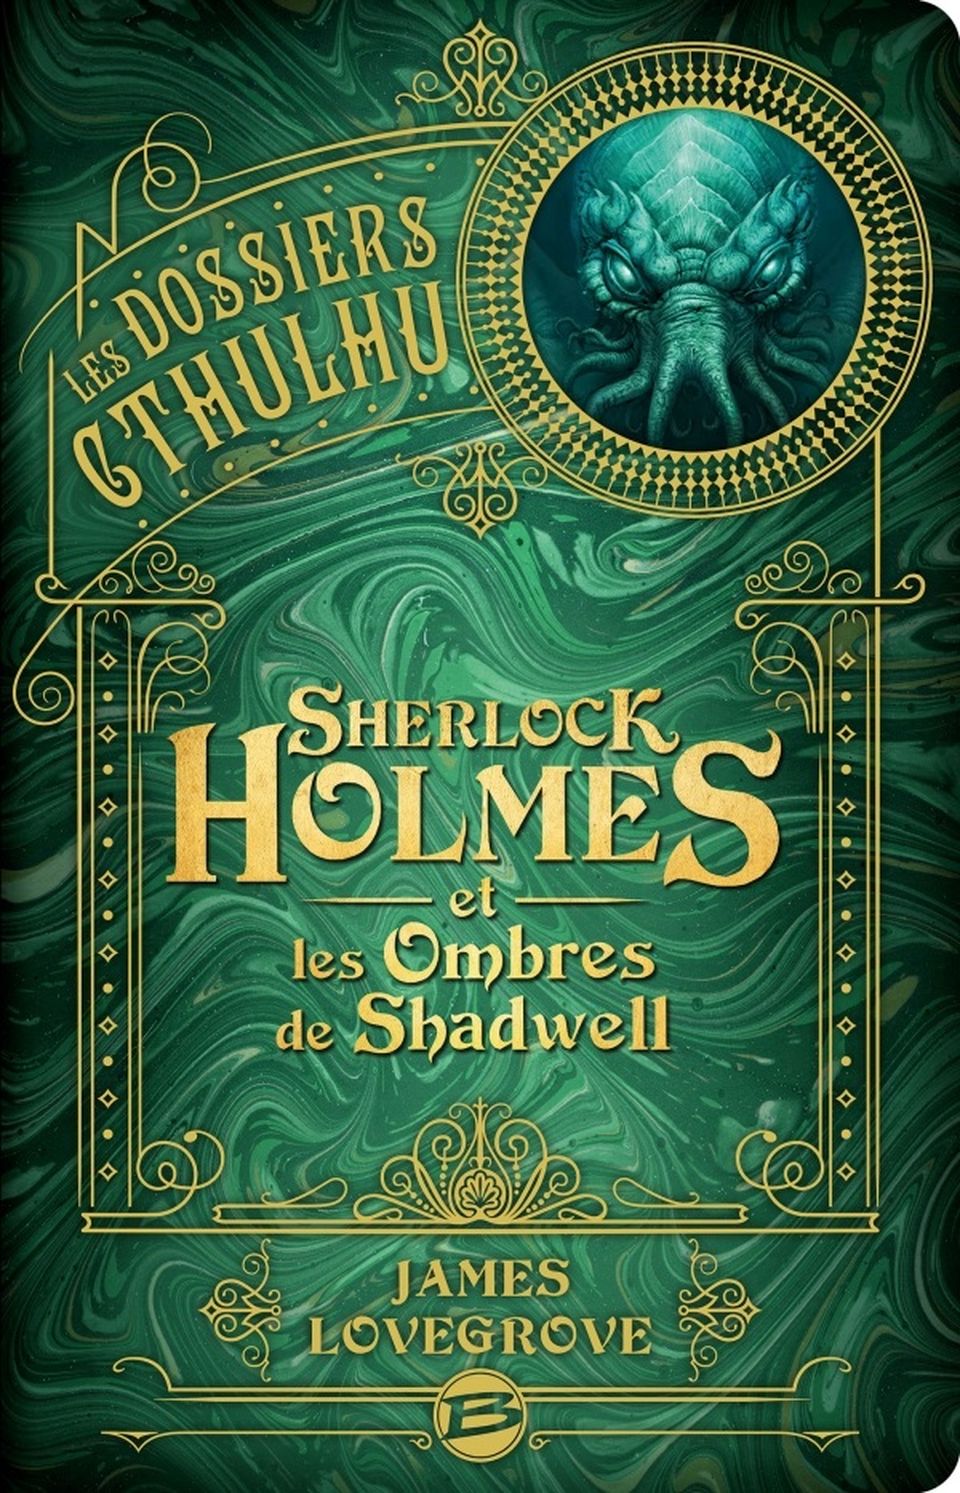 Les dossiers Cthulhu - T1 : Sherlock Holmes et les ombres de Shadwell image